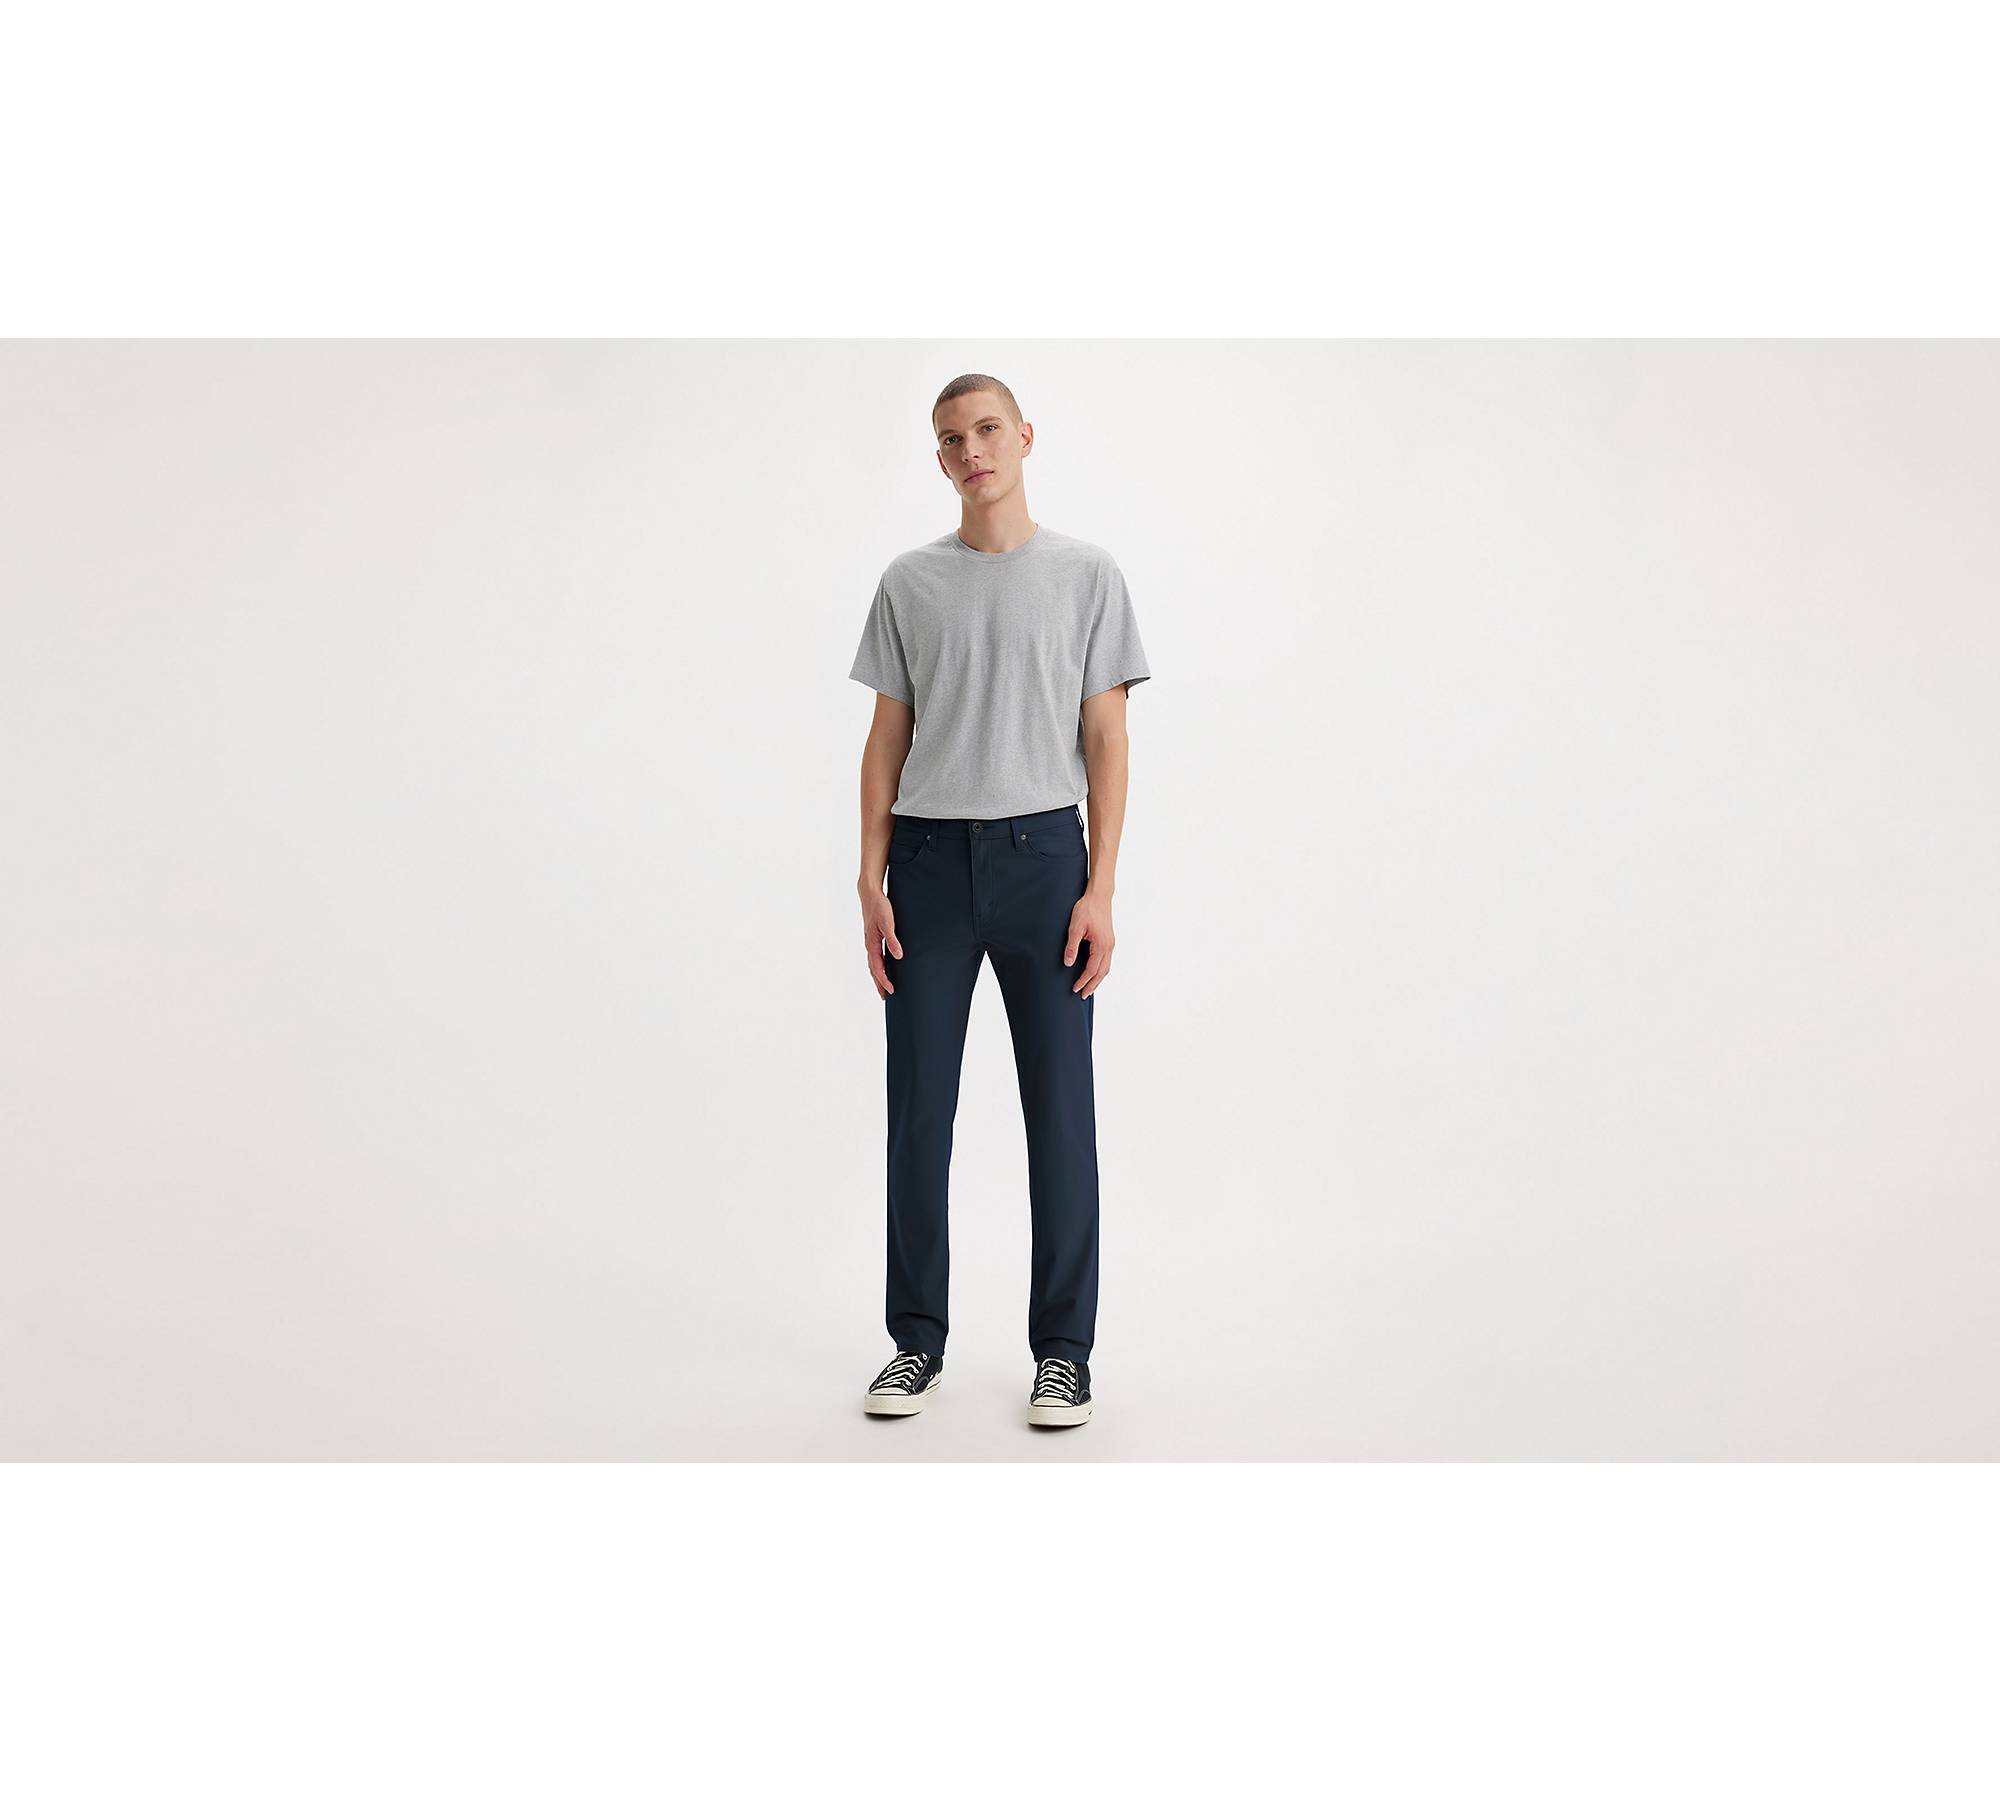 Lululemon Athletica Solid Navy Blue Casual Pants Size 4 - 48% off